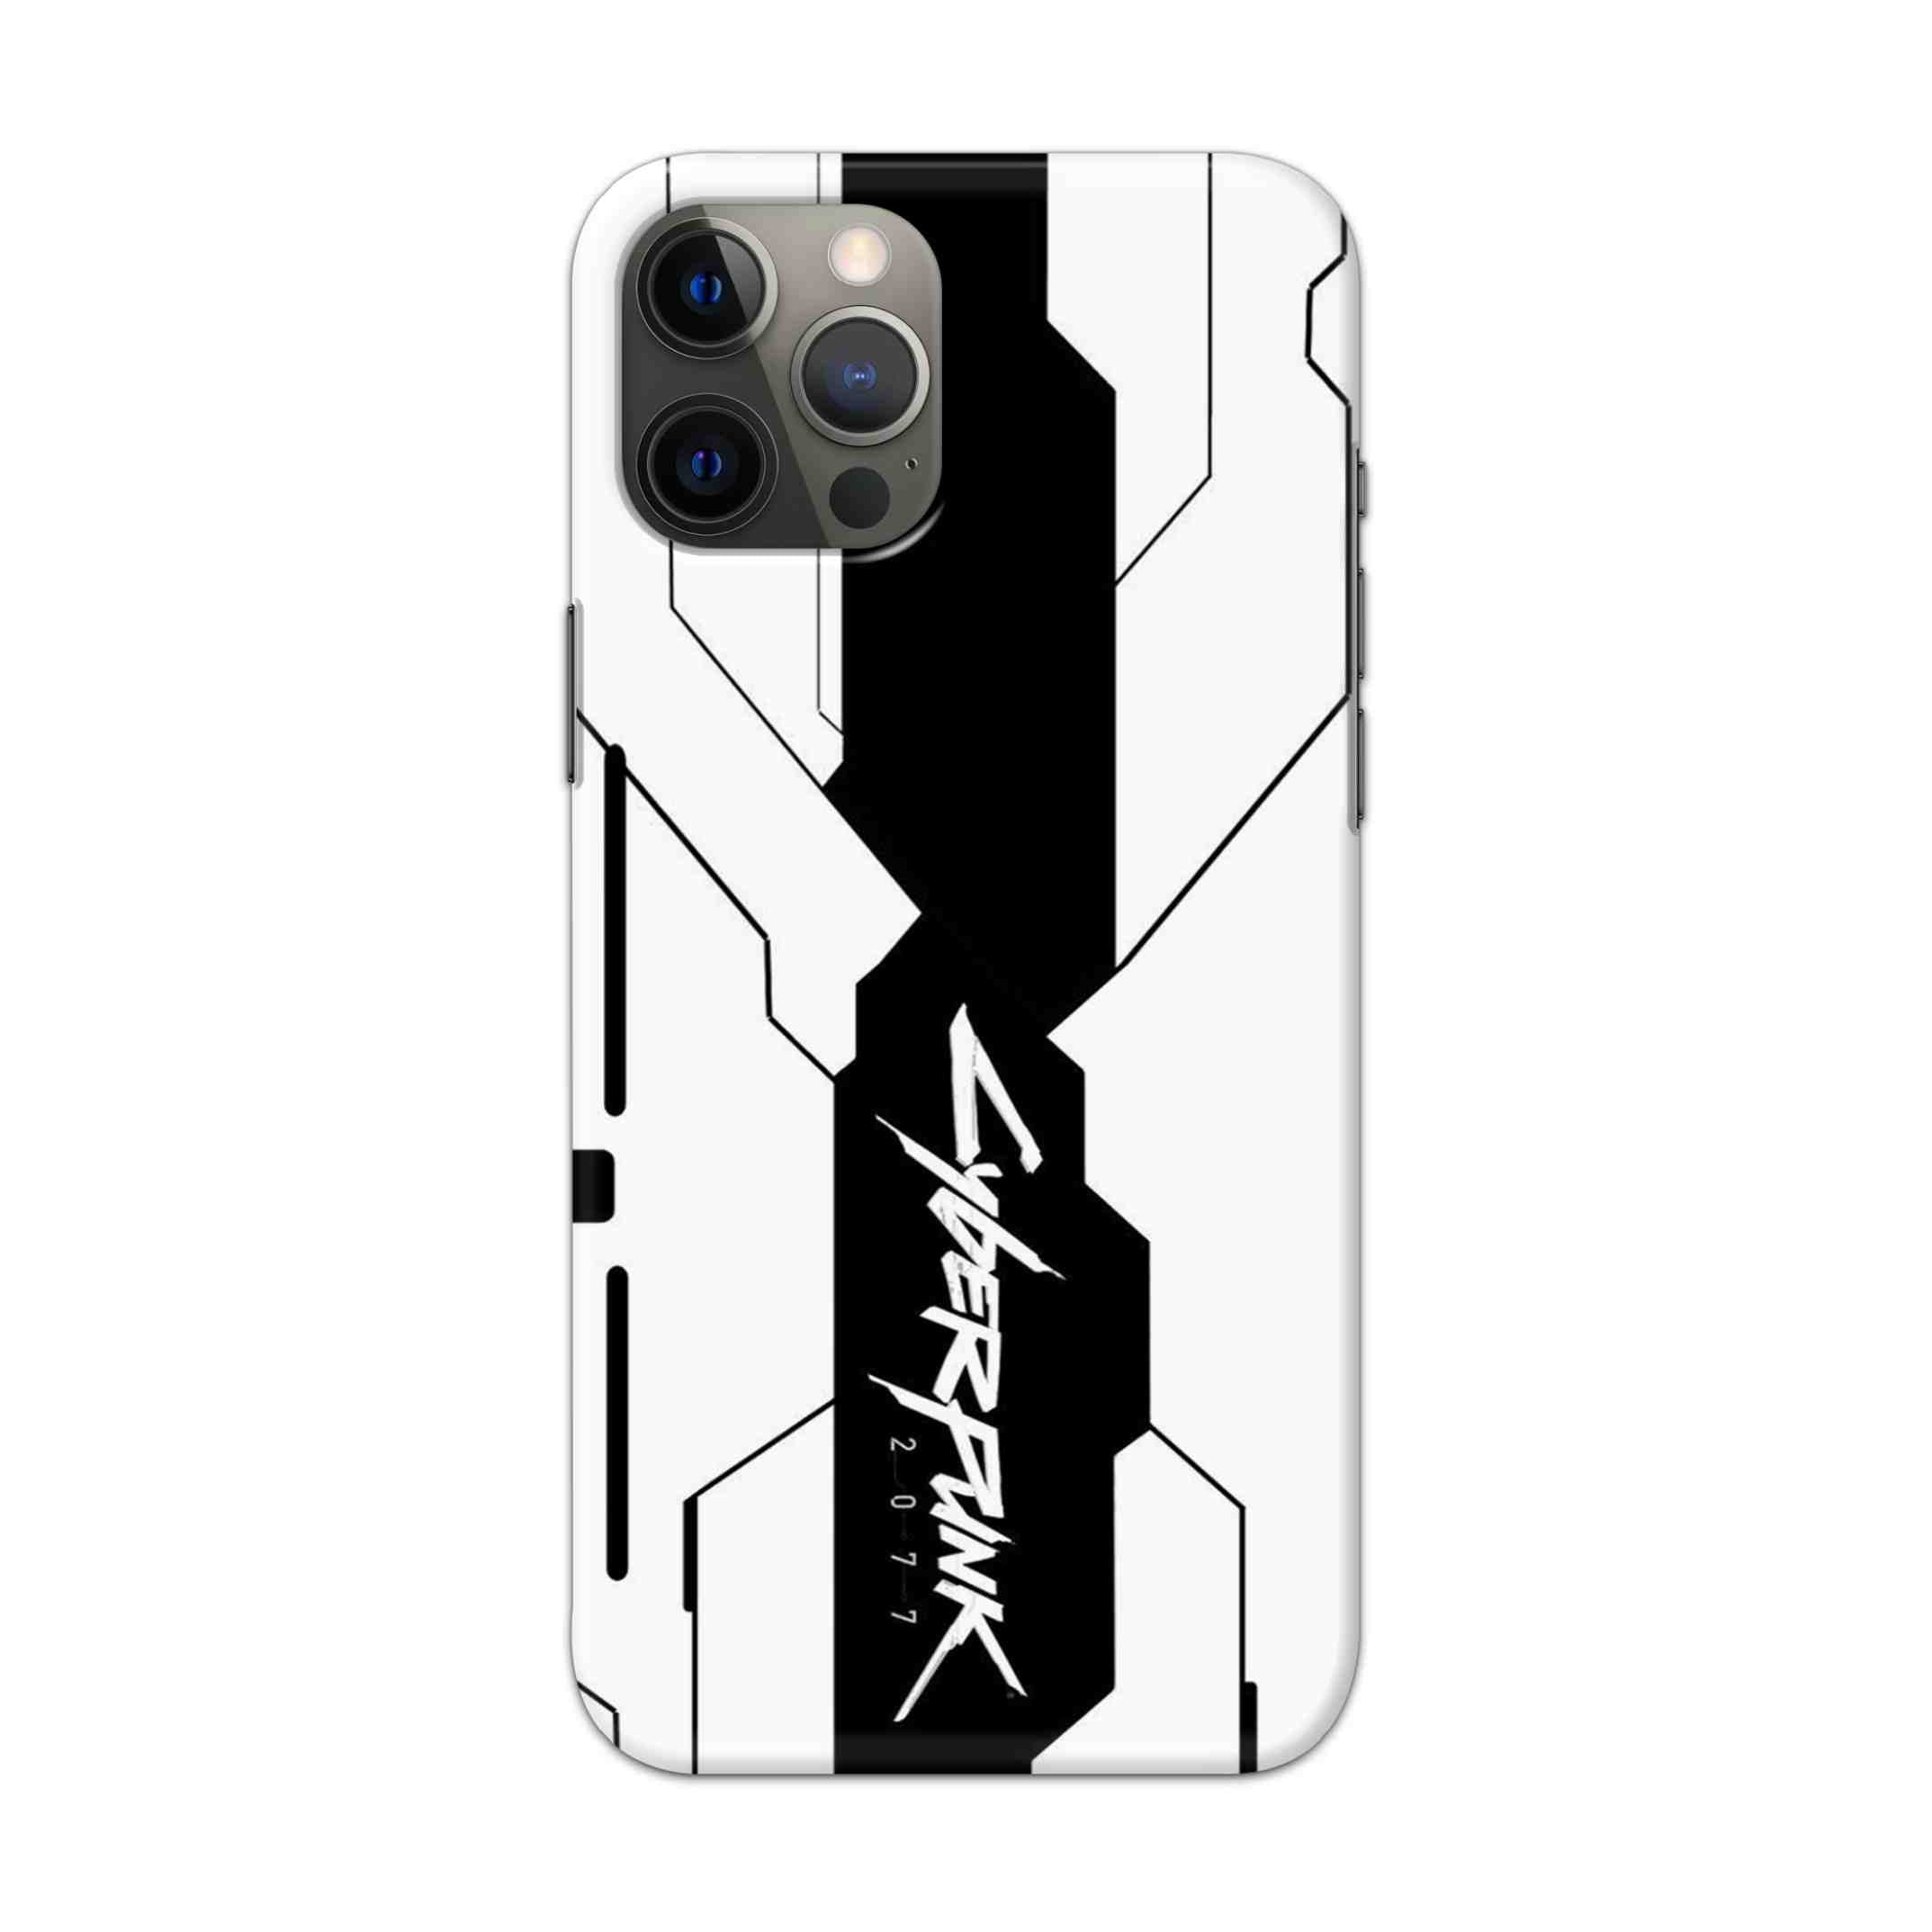 Buy Cyberpunk 2077 Hard Back Mobile Phone Case/Cover For Apple iPhone 12 pro max Online